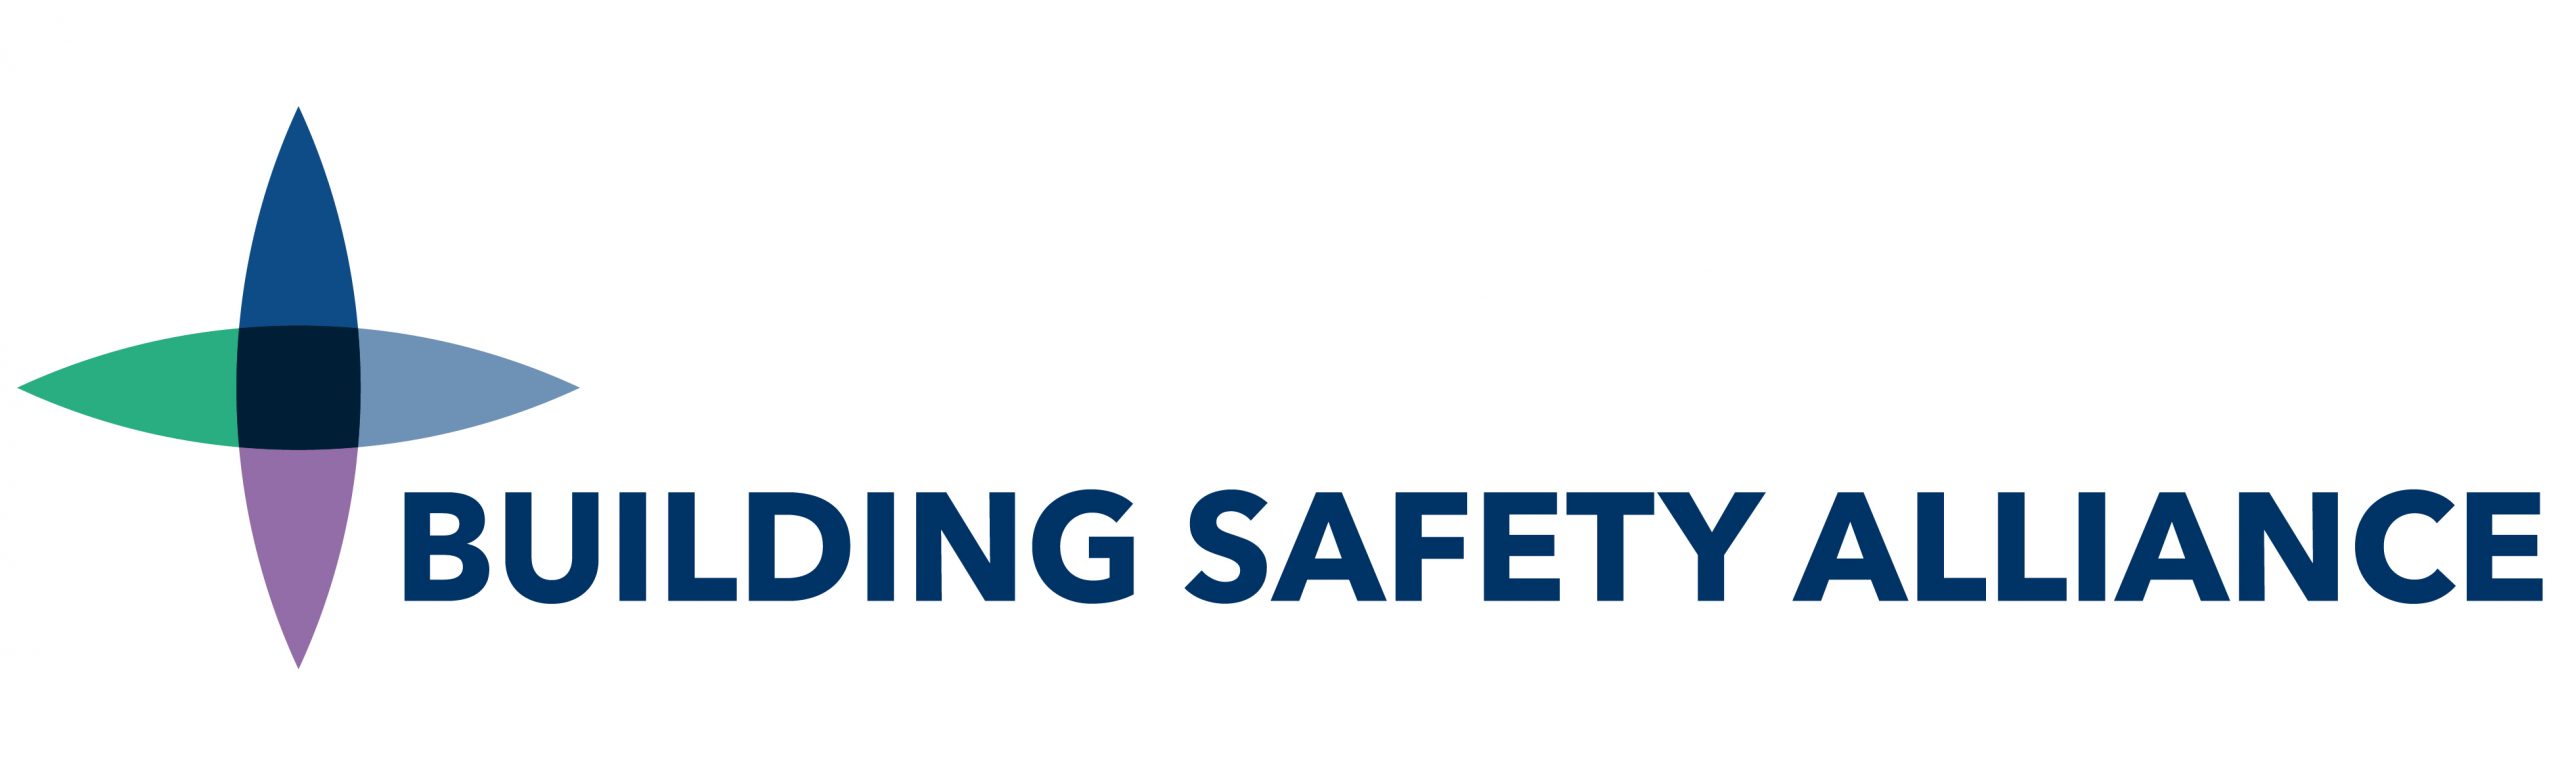 Cross-sector Building Safety Alliance invites collaborators for golden thread tools